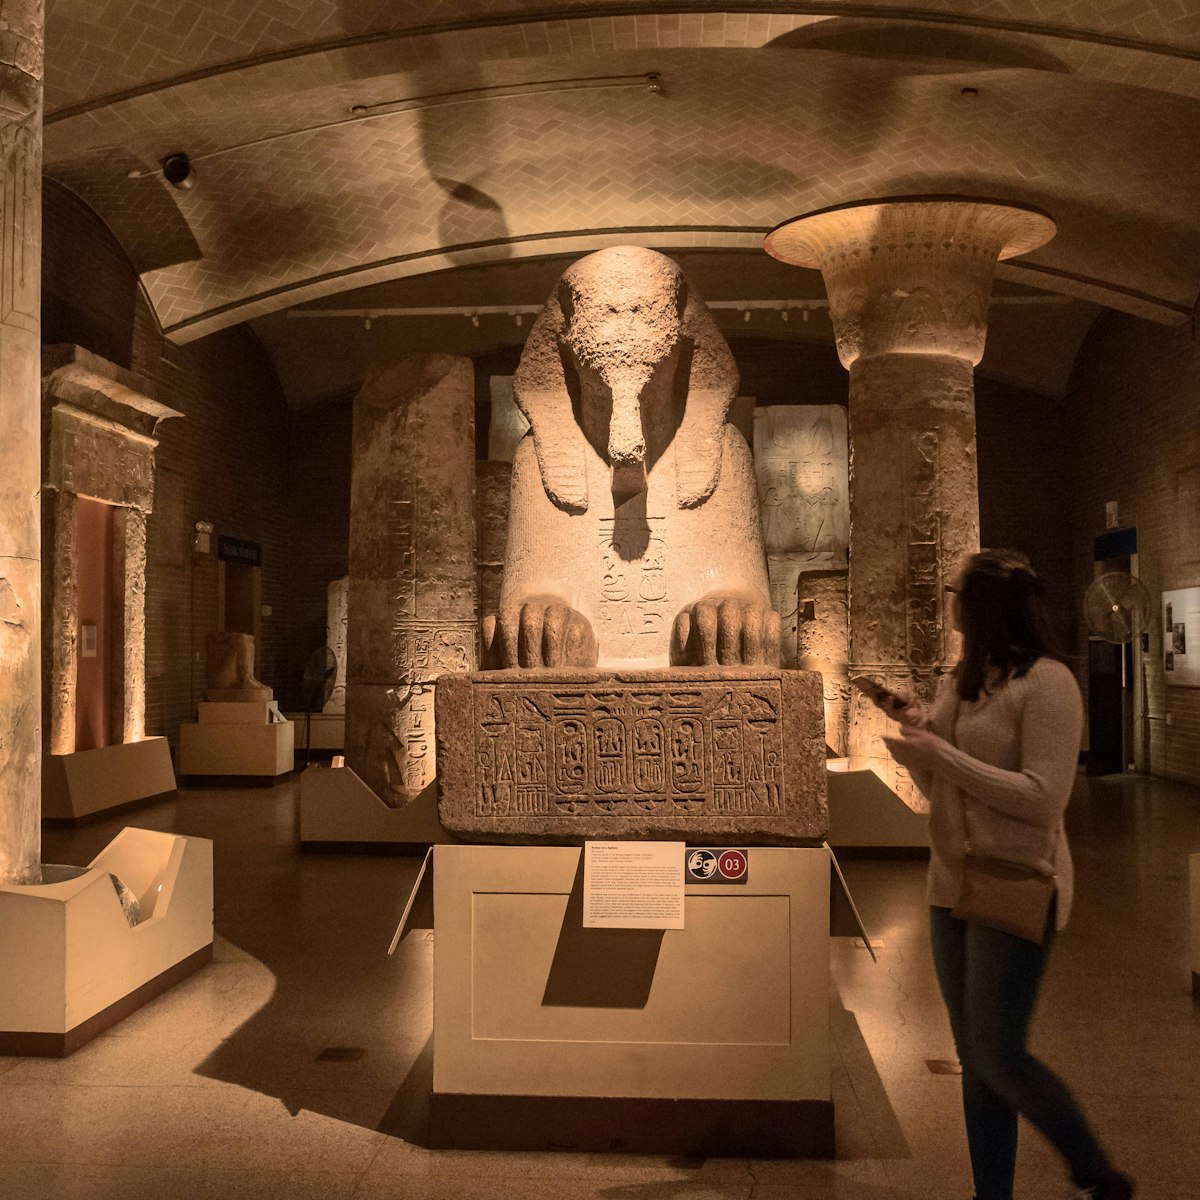 15-ton Sphinx and its surrounding pillars and gateways at the University of Pennsylvania Museum of Archaeology and Anthropology.